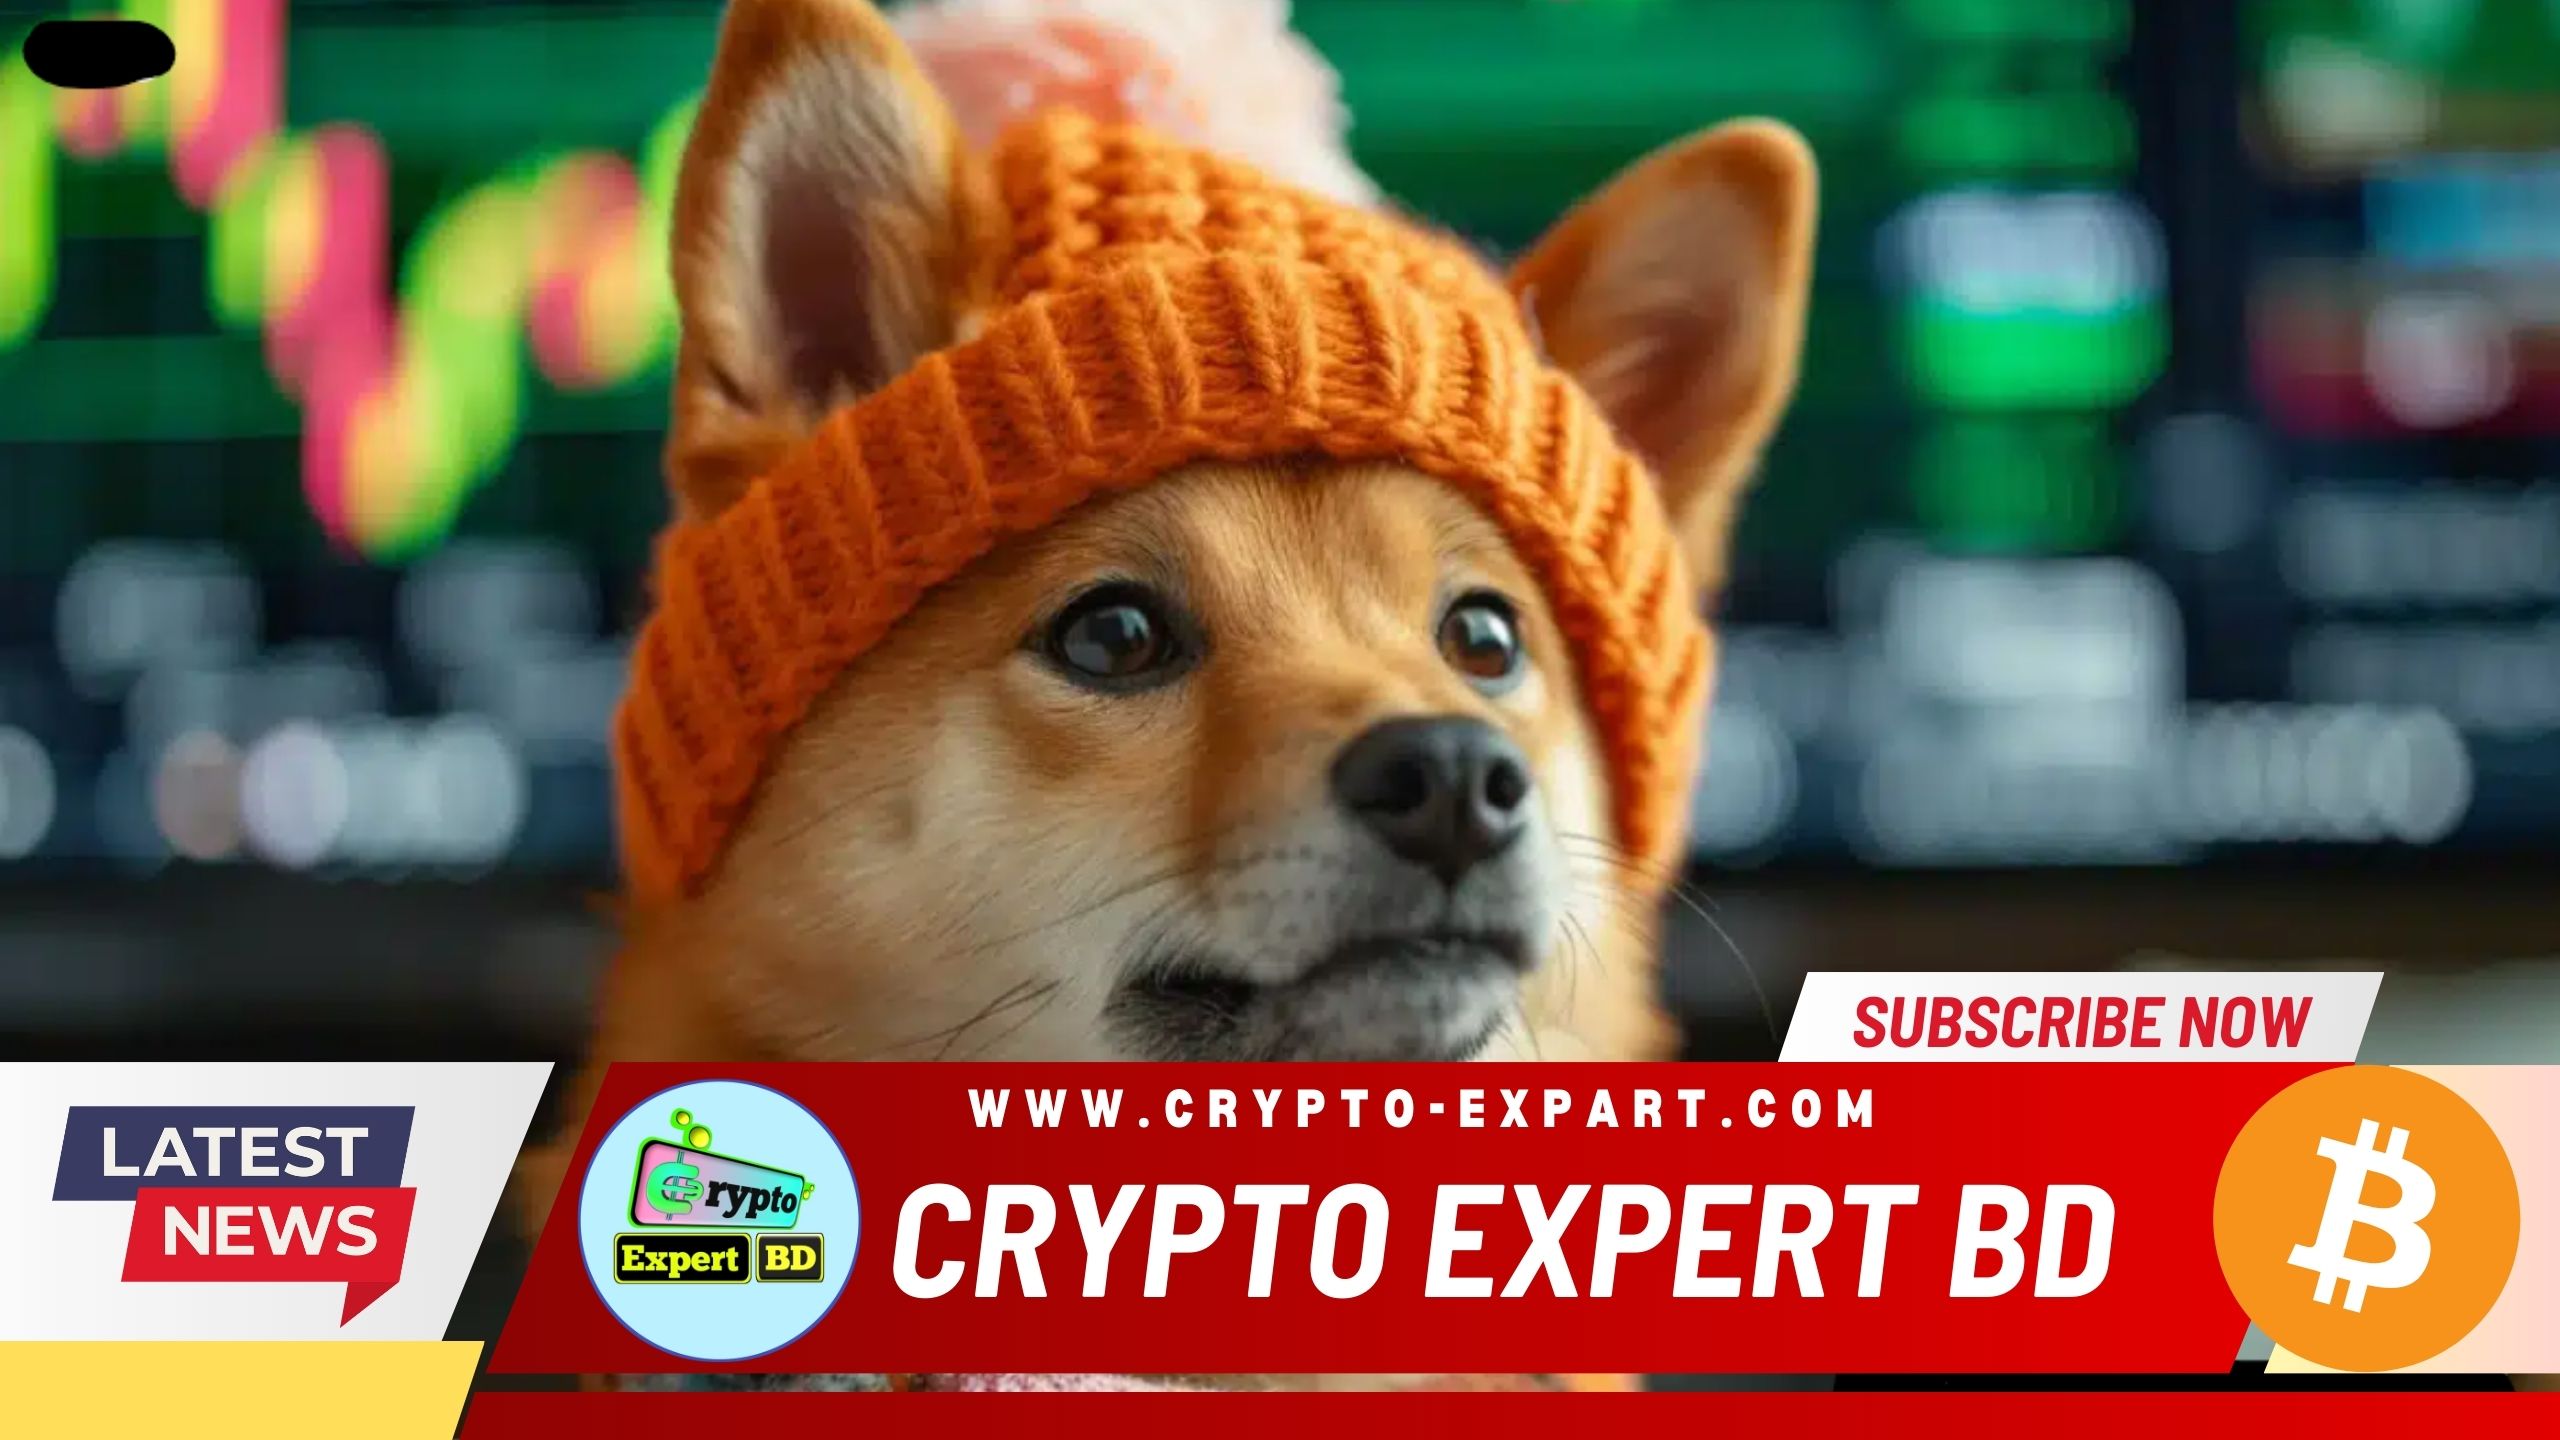 Dog-Themed Meme Coin WIF Hits Two-Month High Amid Rising Trader Skepticism